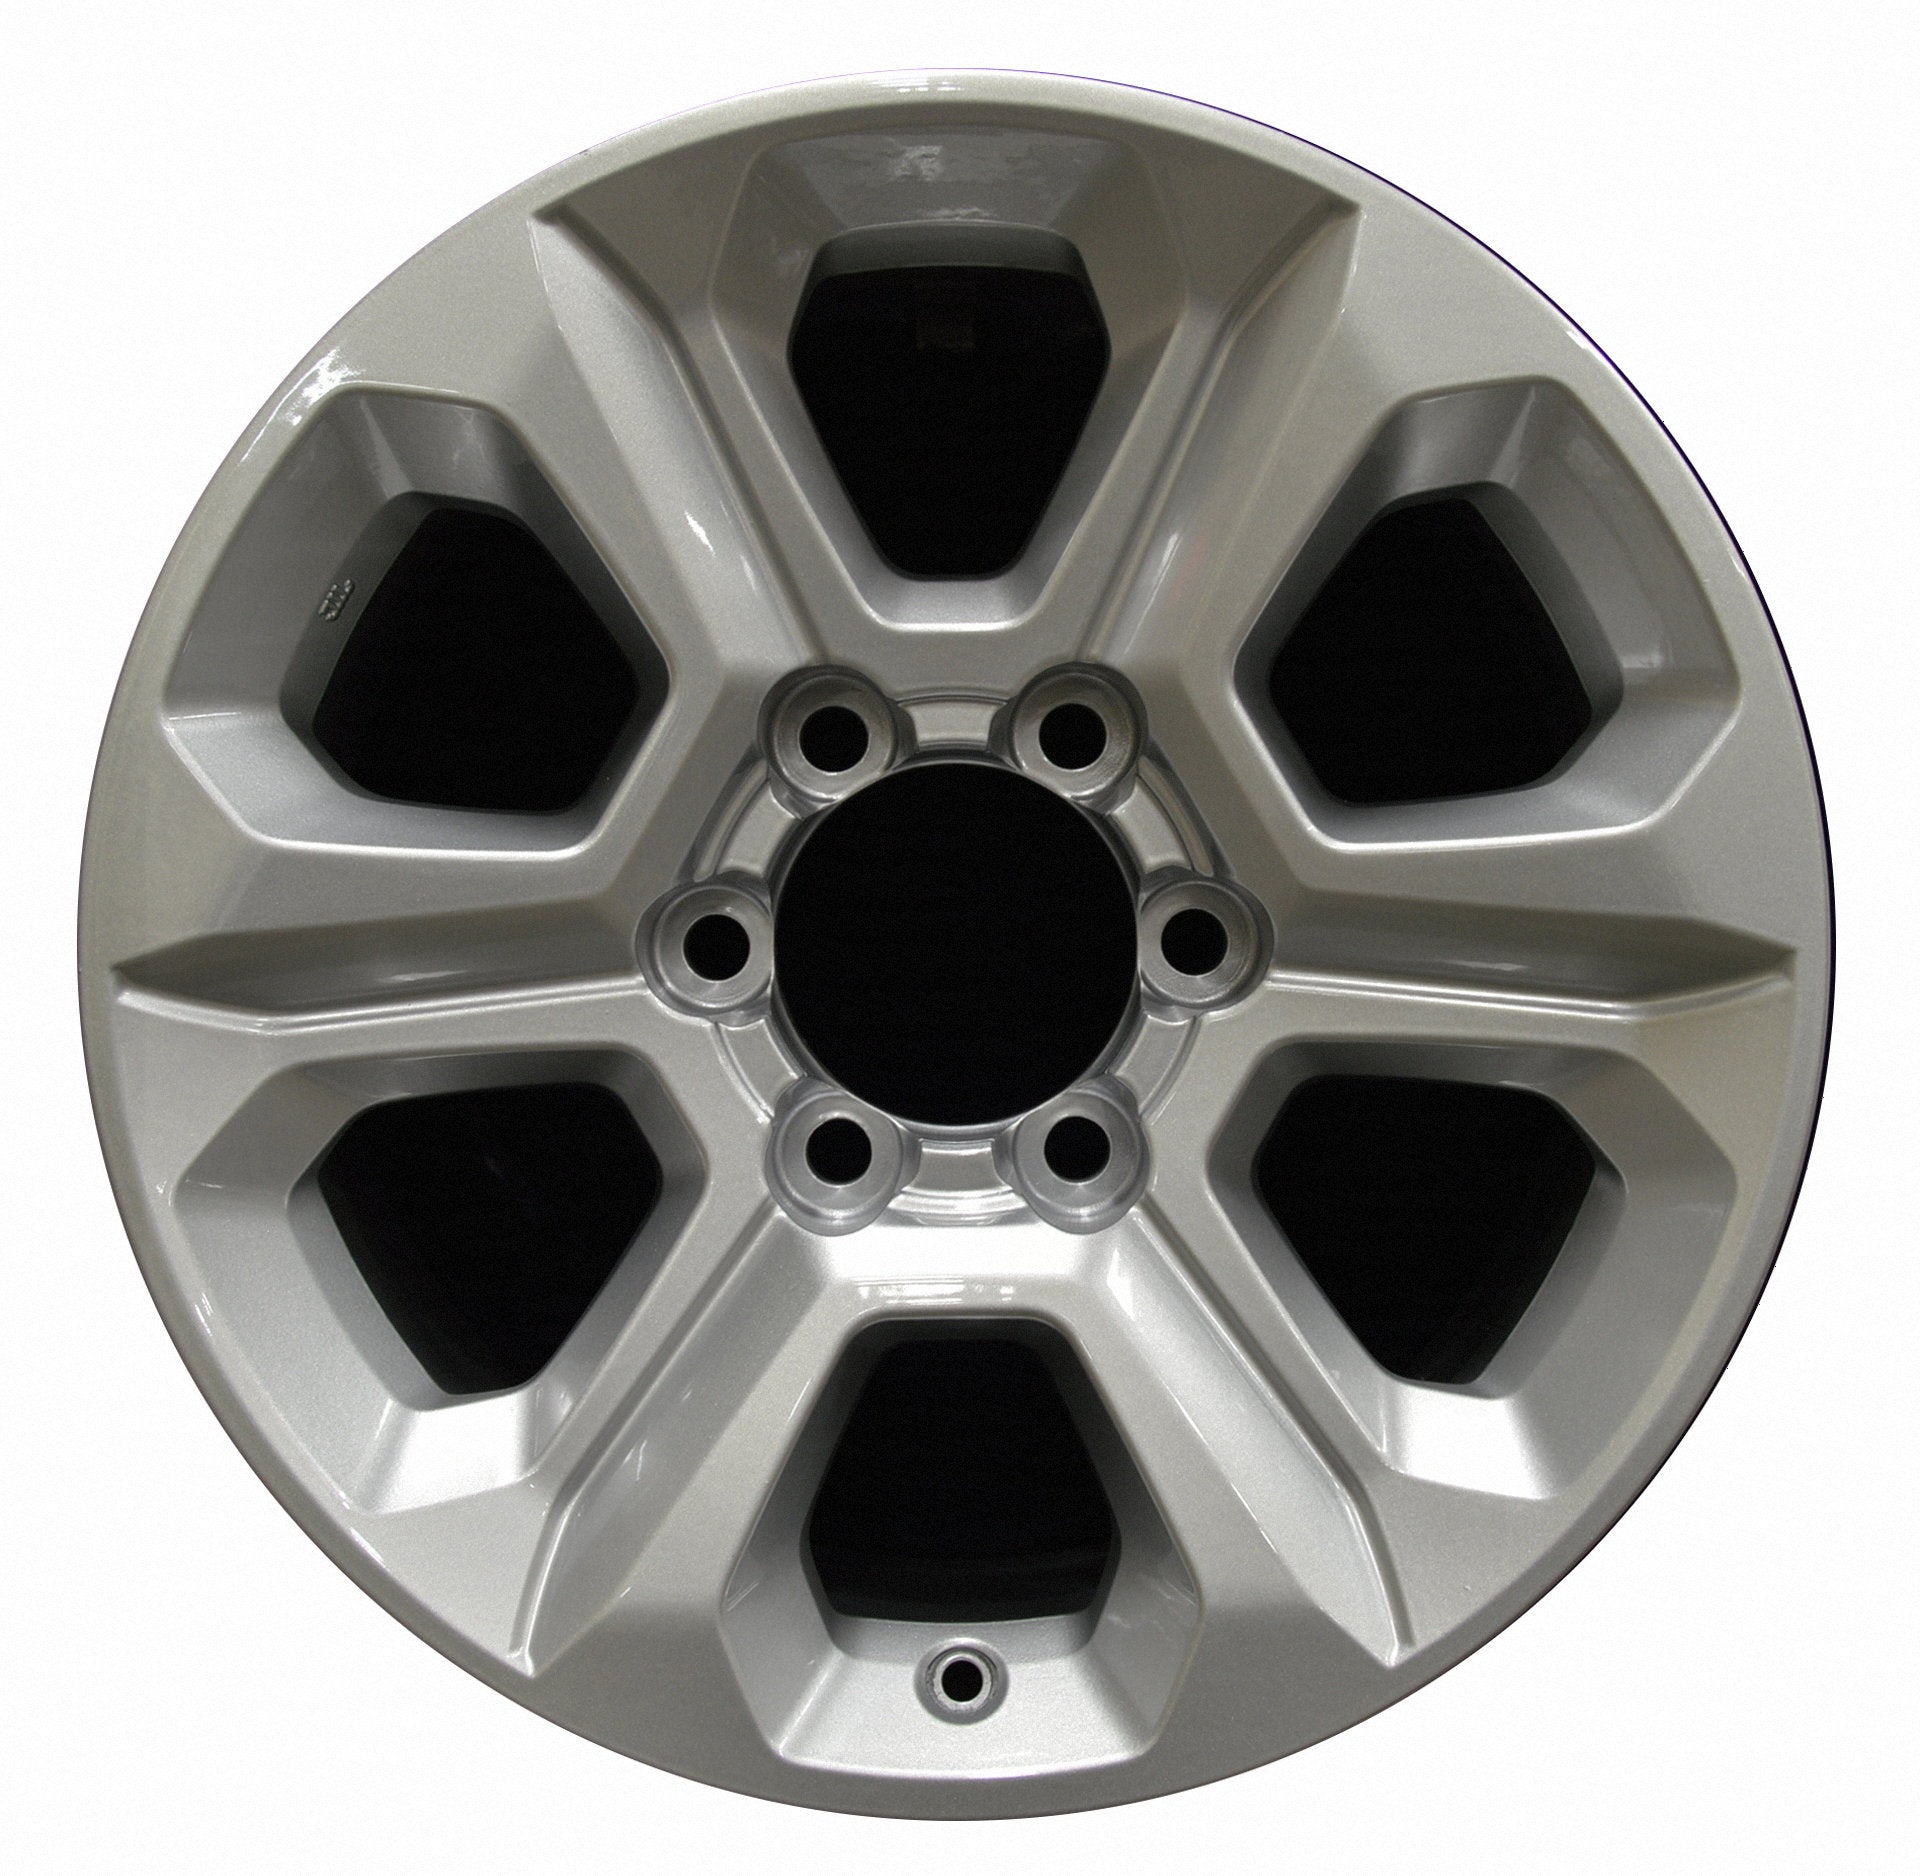 Toyota 4 Runner  2014, 2015, 2016, 2017, 2018, 2019, 2020, 2021, 2022 Factory OEM Car Wheel Size 17x7 Alloy WAO.75153.PS15.FF